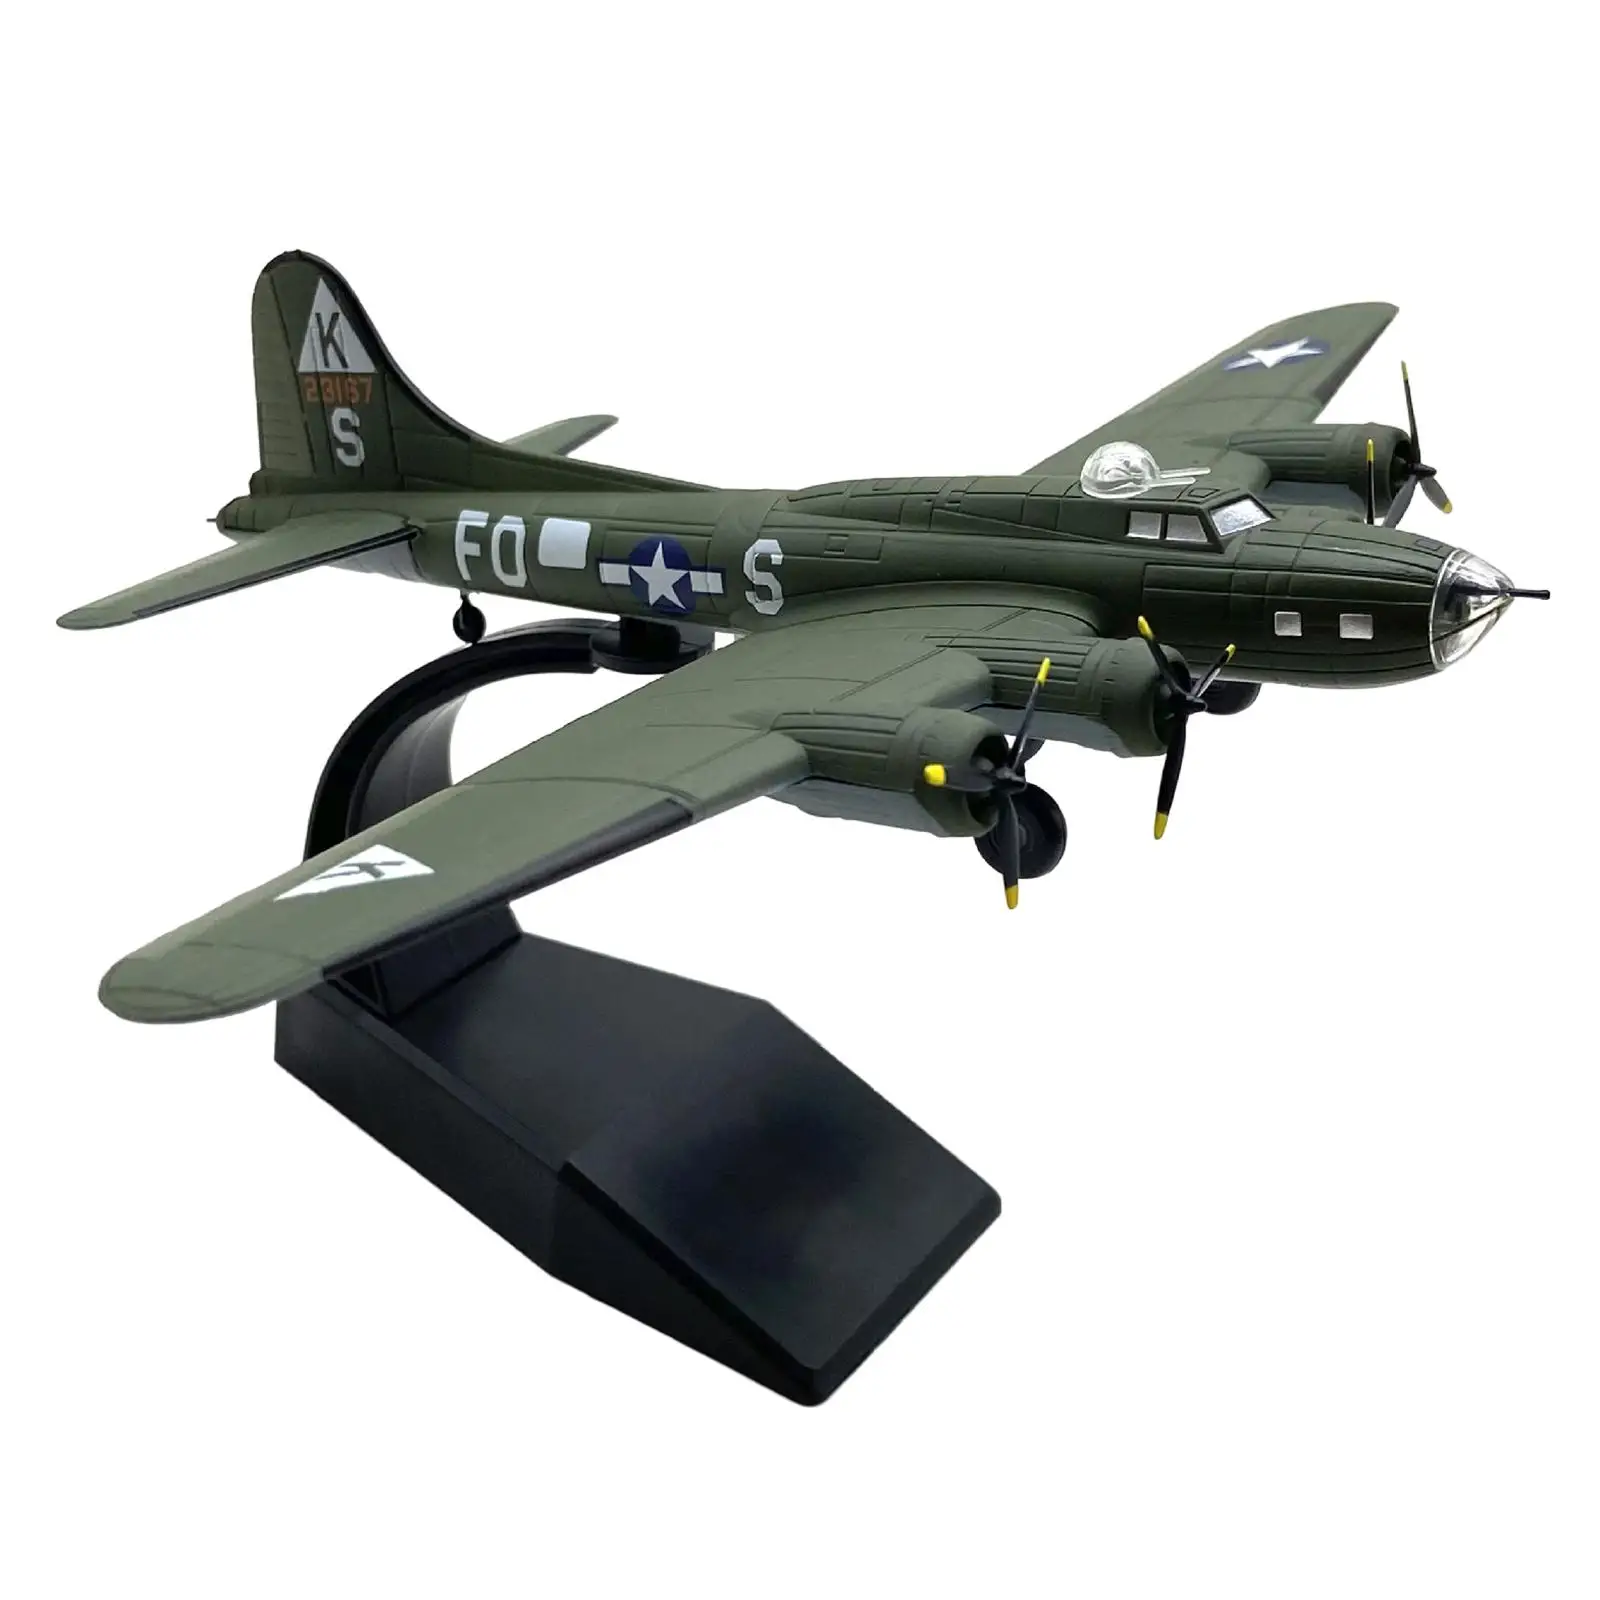 1/144 Scale US B 17 Aircraft Model Ornaments Versatile Airplane Model